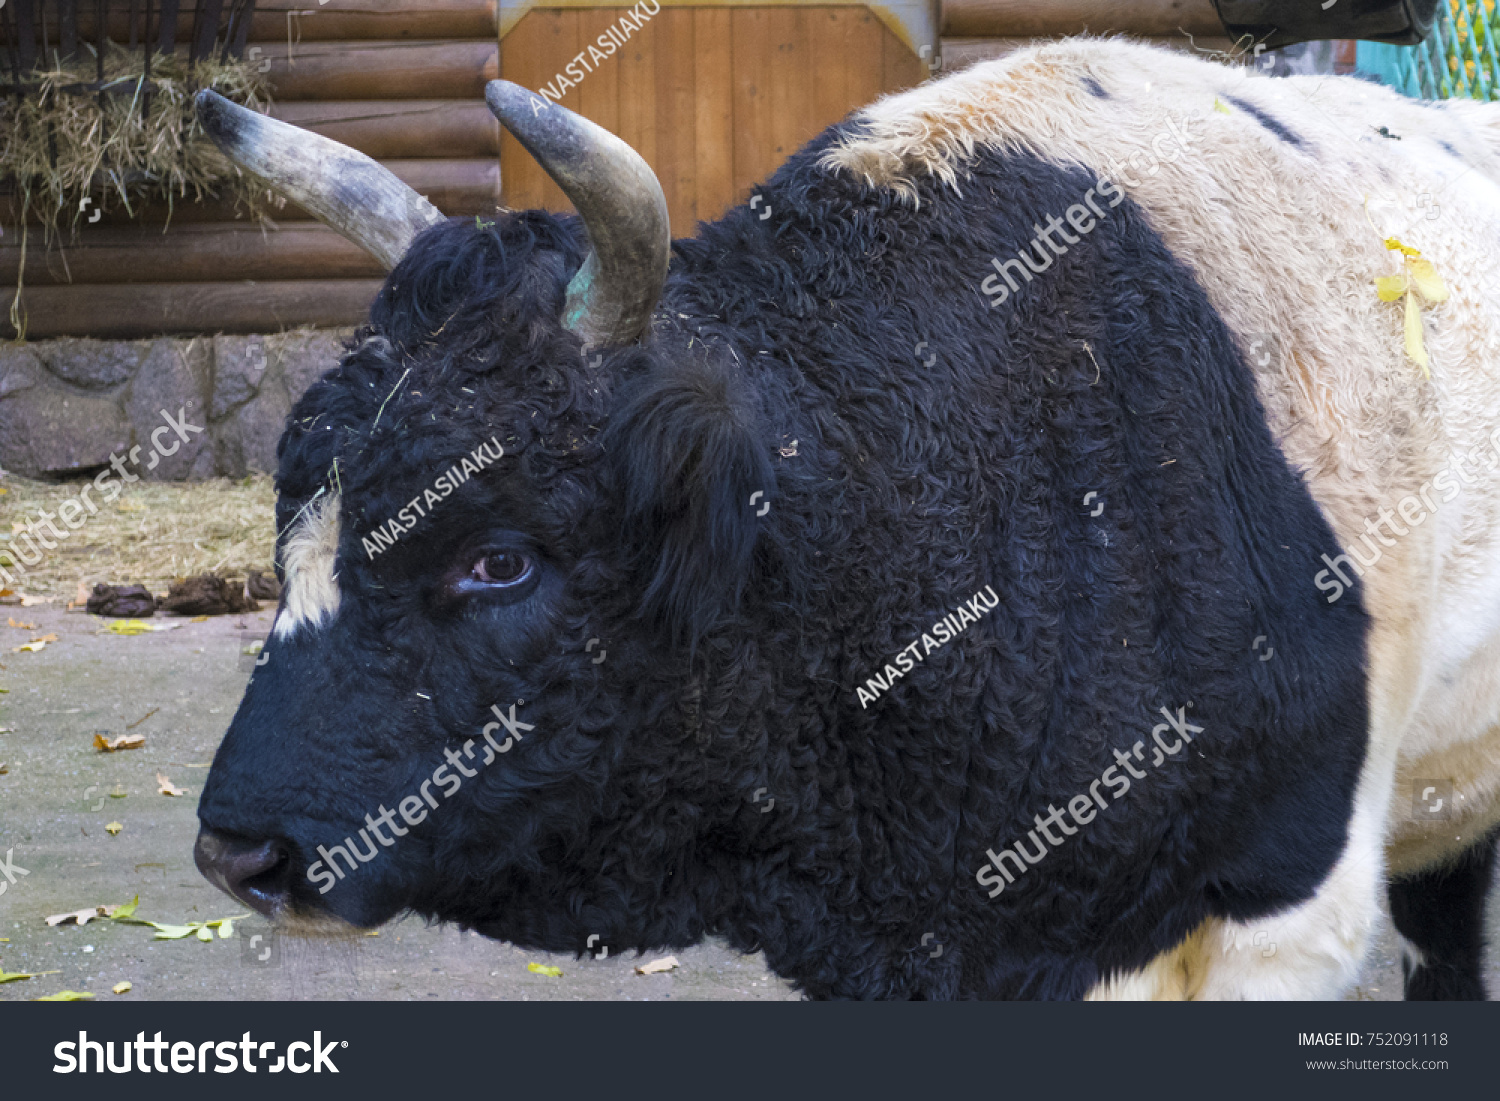 5 Big Handsome Fat Bull Images, Stock